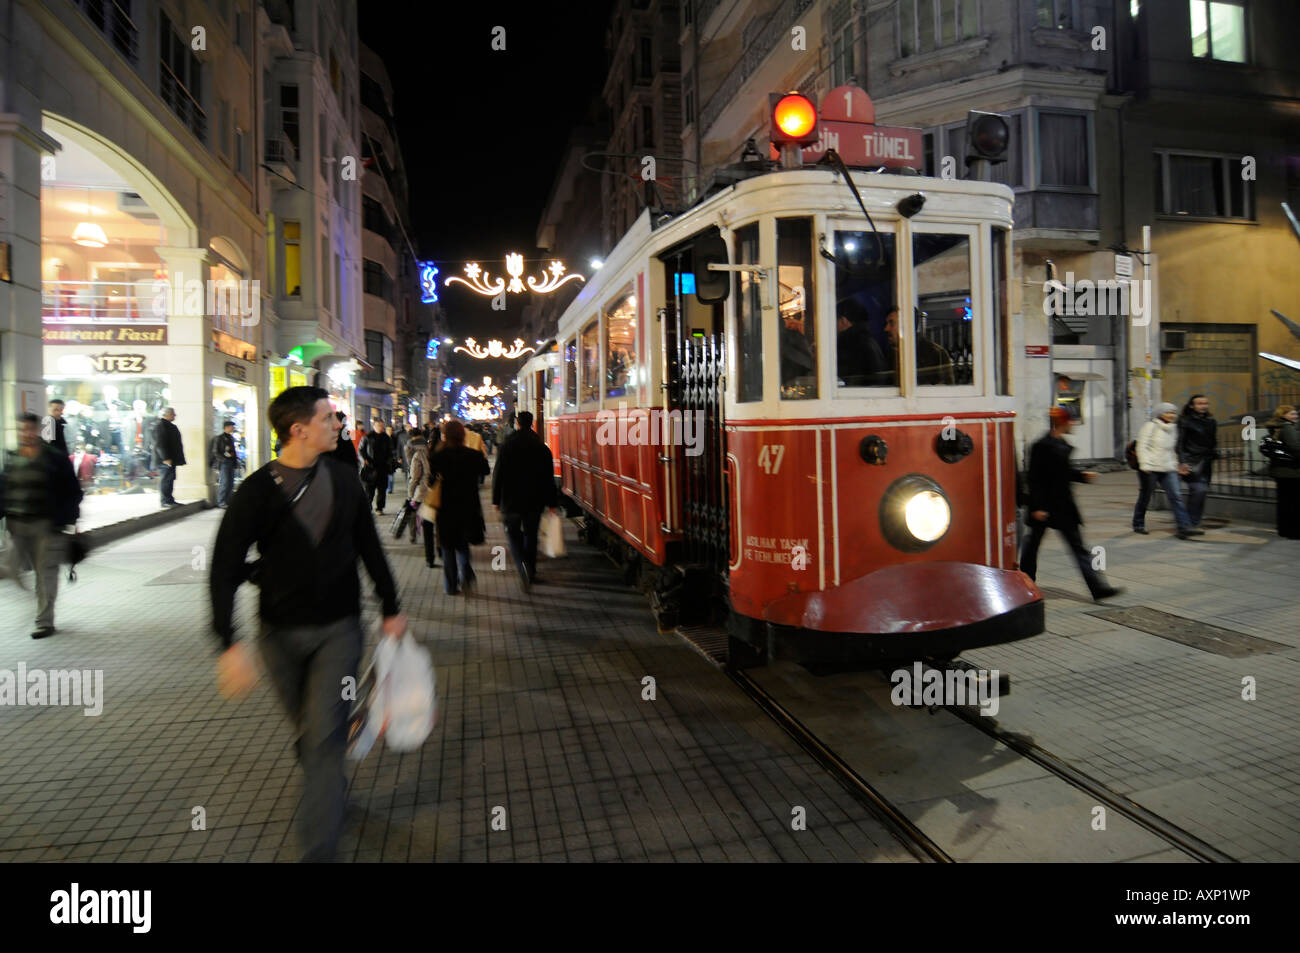 The 'nostalgy' tram running between Taksim Square and Tunel on Istiklal Cadesi, in Istanbul, Turkey Stock Photo